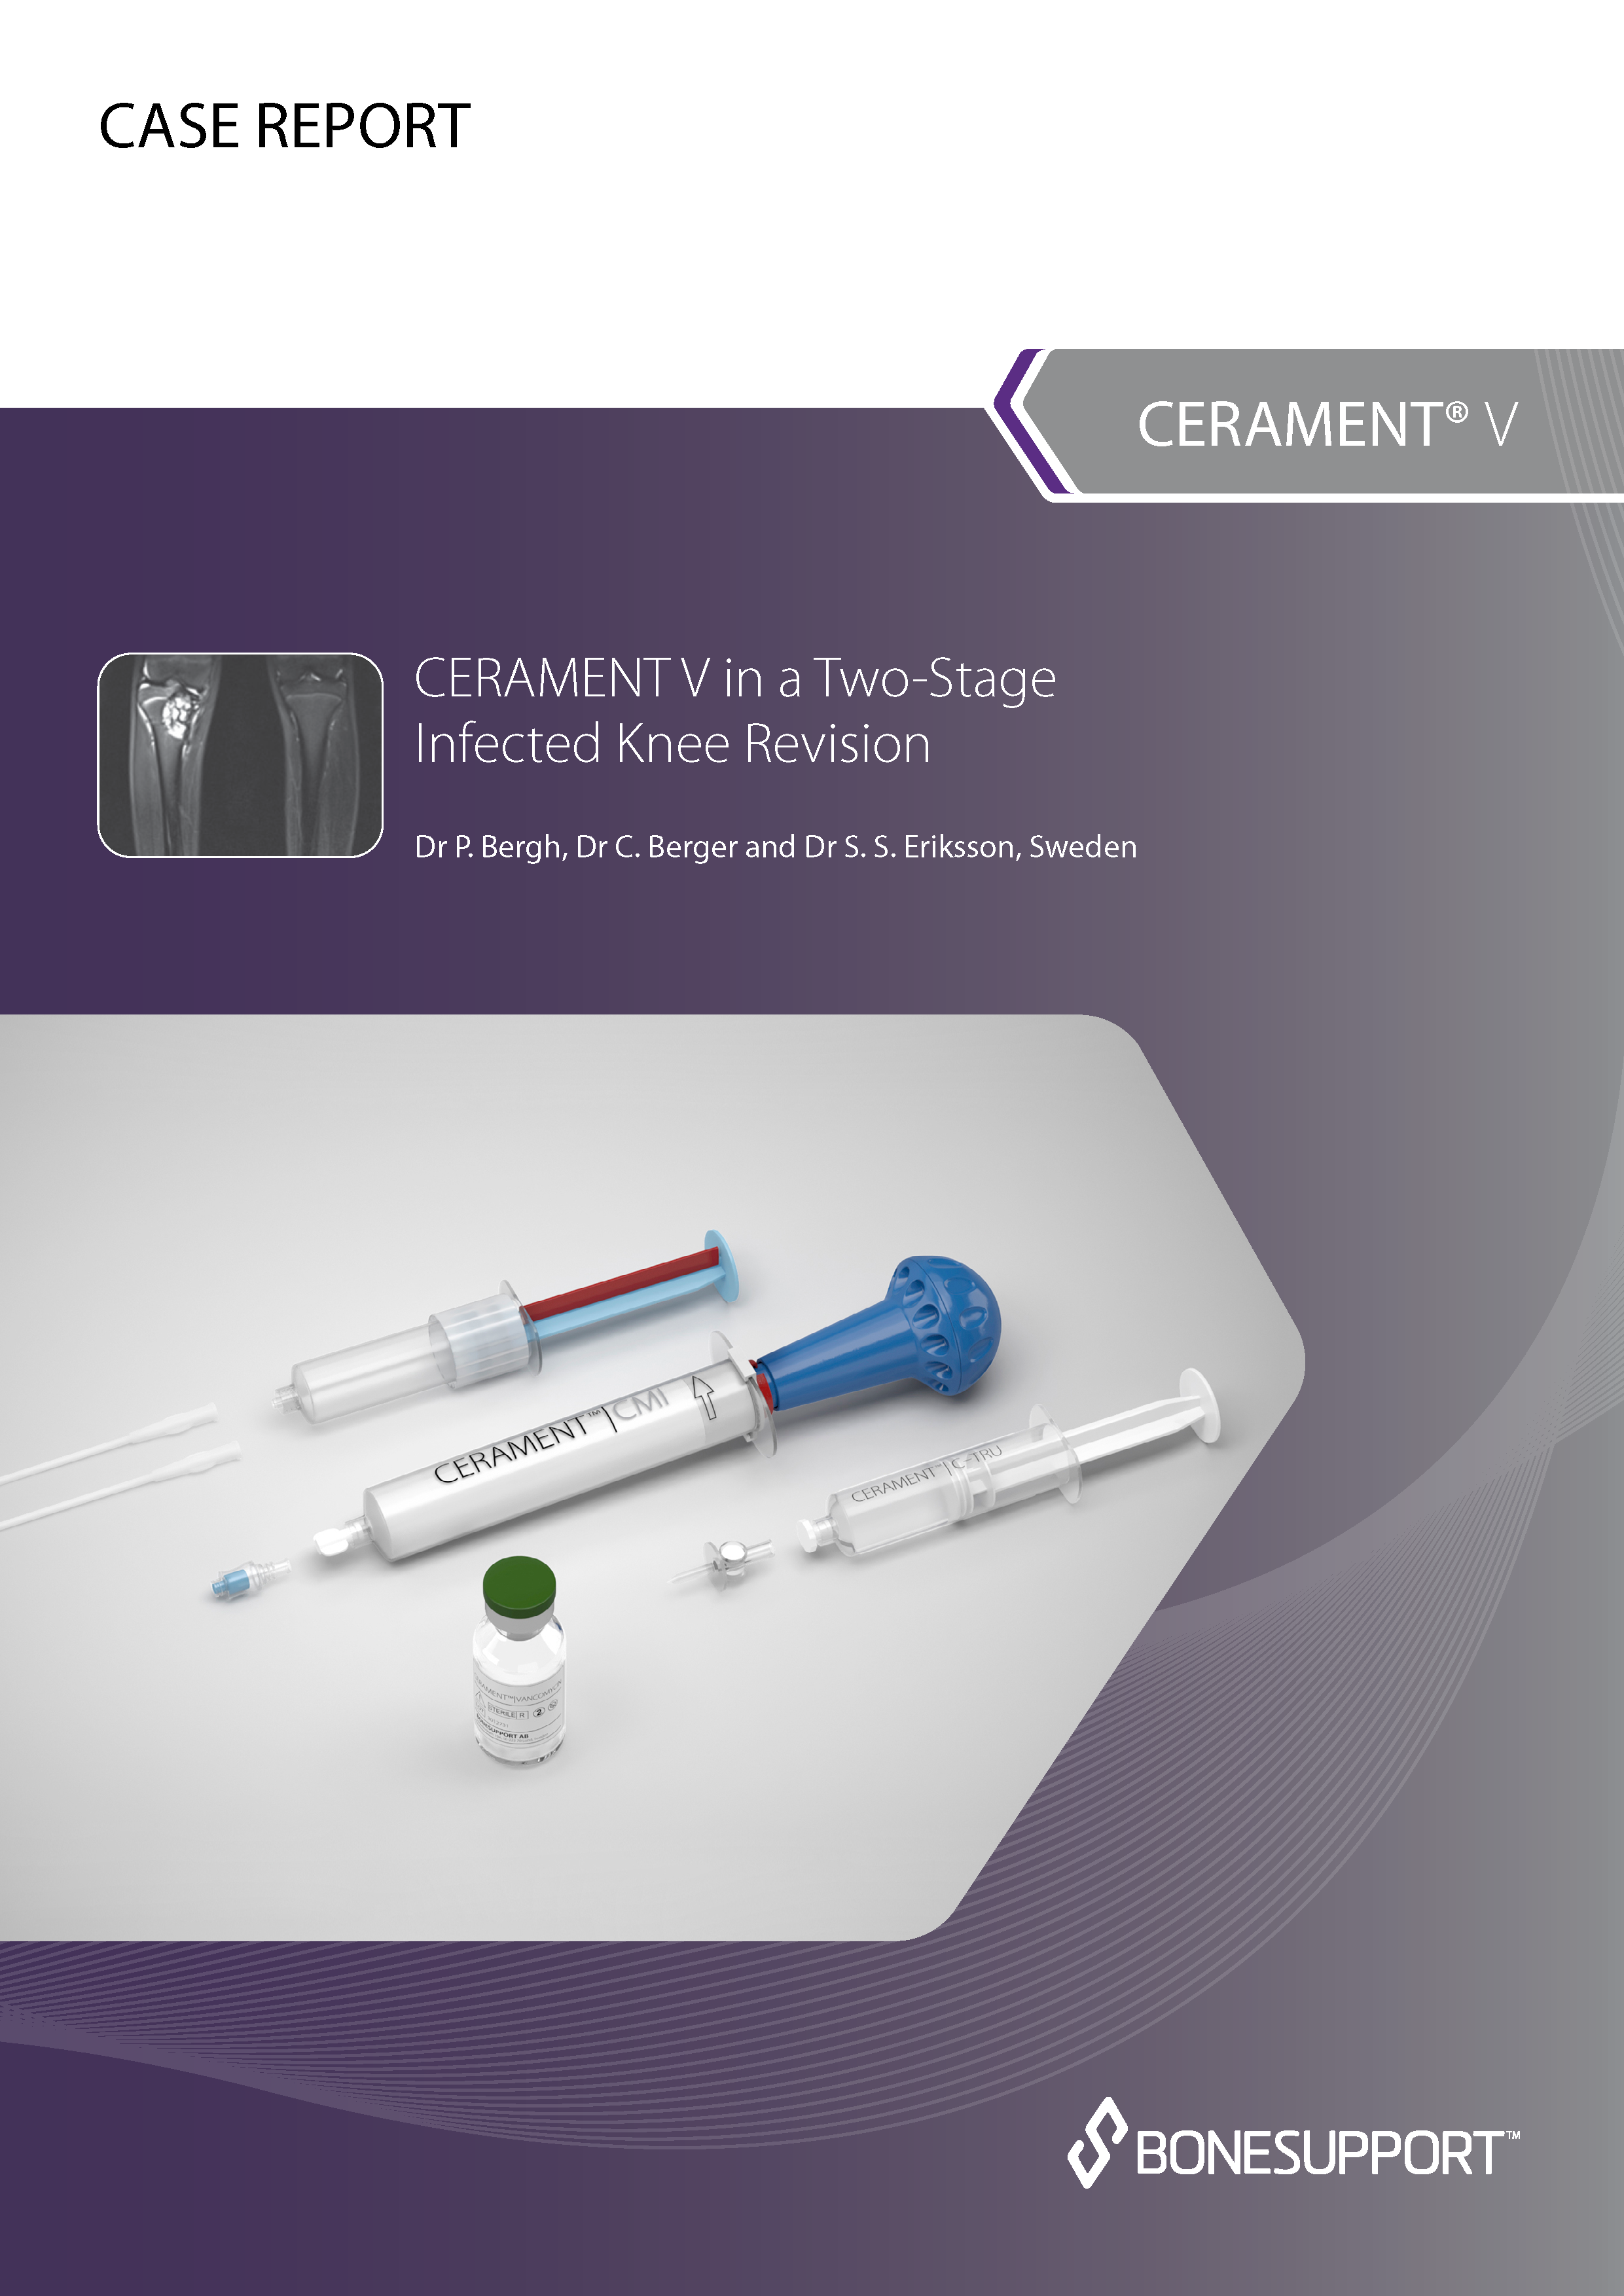 CERAMENT® V in a two-stage infected knee revision